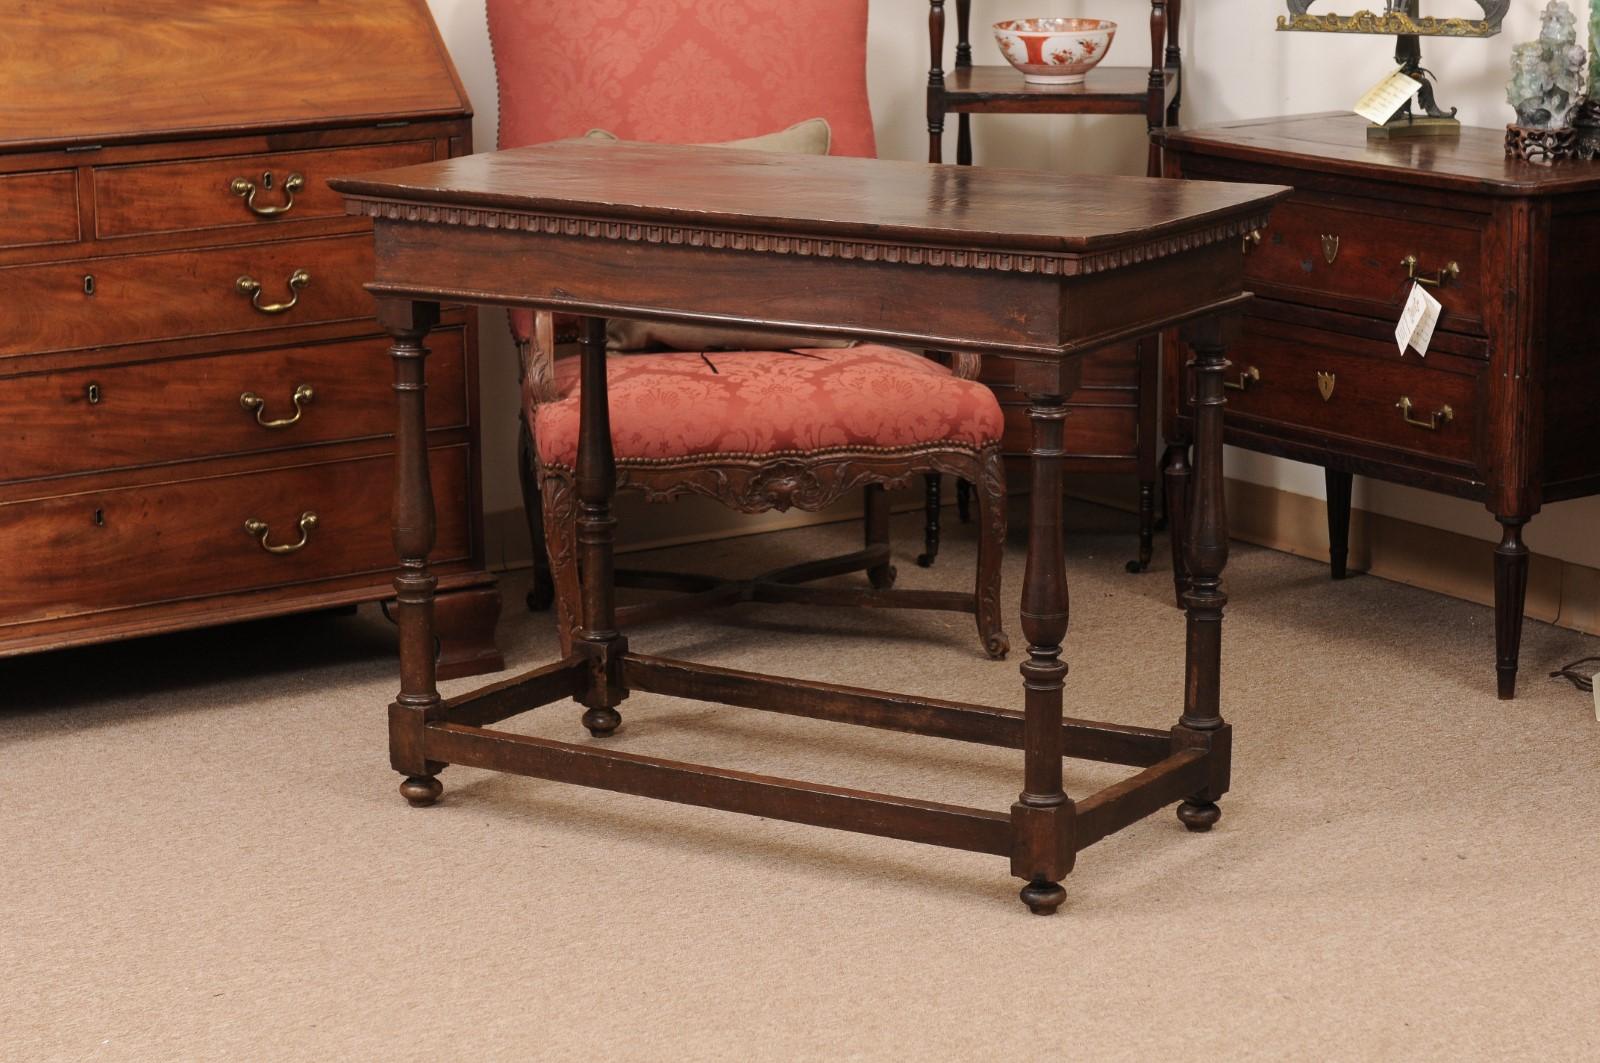 17th Century Italian Walnut Narrow Console / Center Table with Drawer and Turned Legs